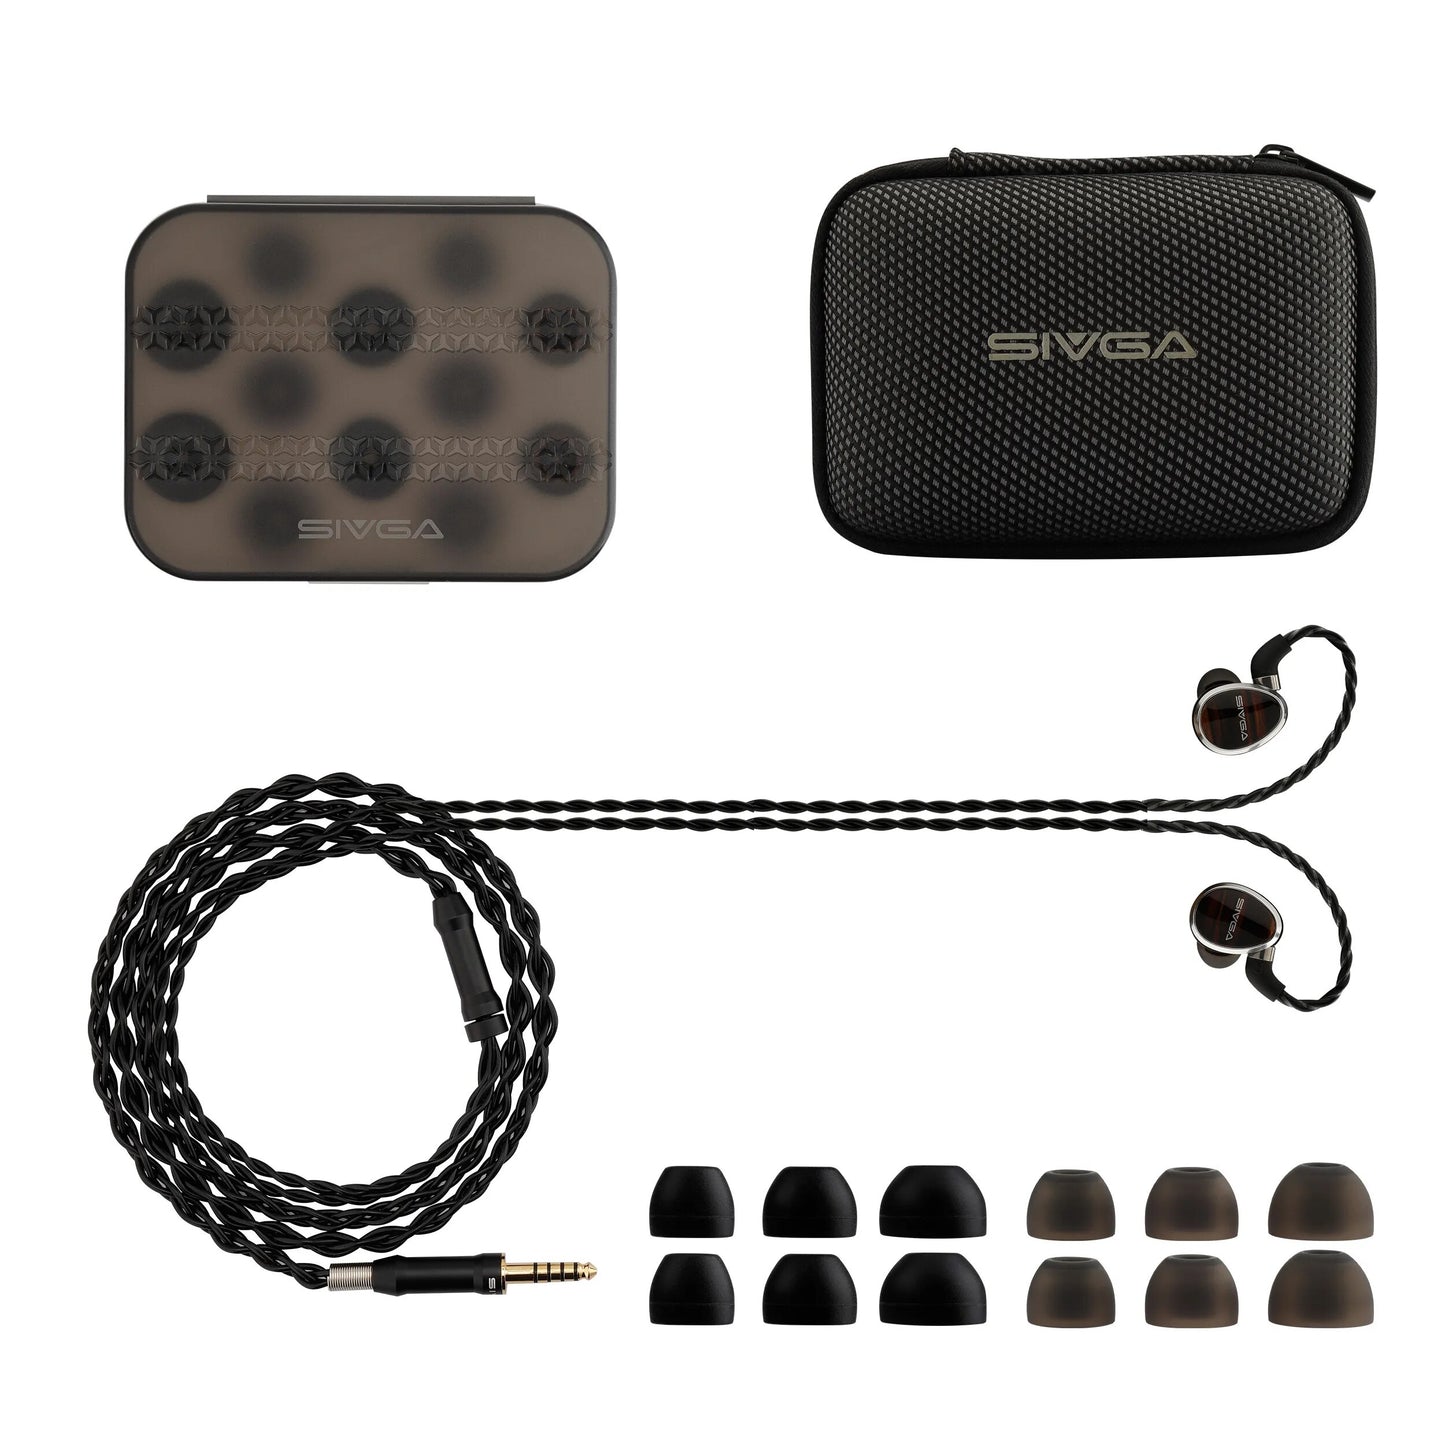 SIVGA Nightingale Classic Wooden Planar Magnetic In-ear Monitors